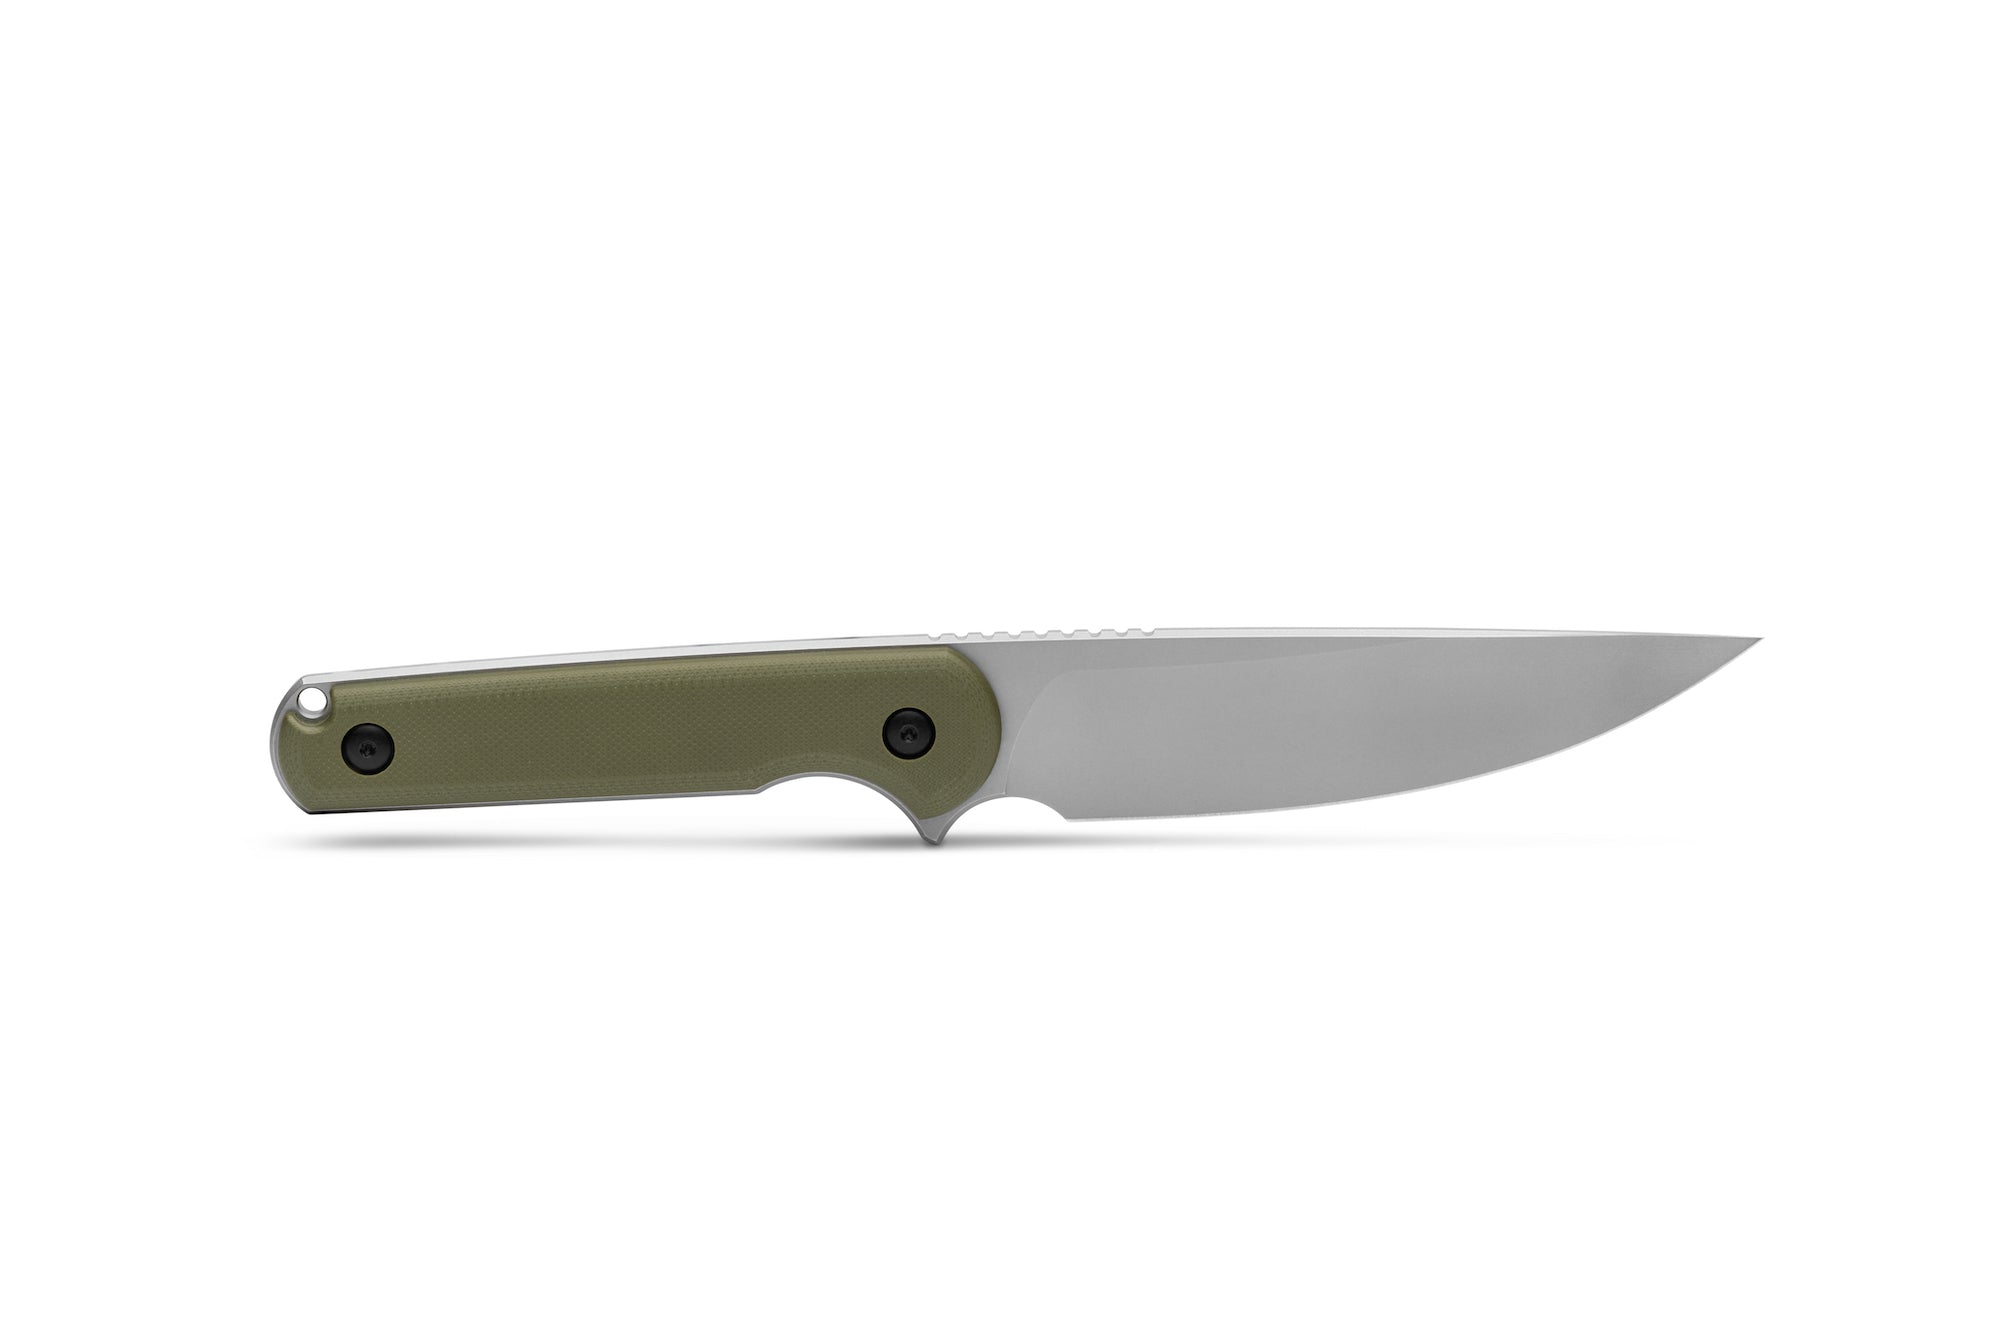 Ferrum Forge Lackey XL Fixed Blade Knife with Green G10 Handle and D2 or 9Cr18MoV Steel